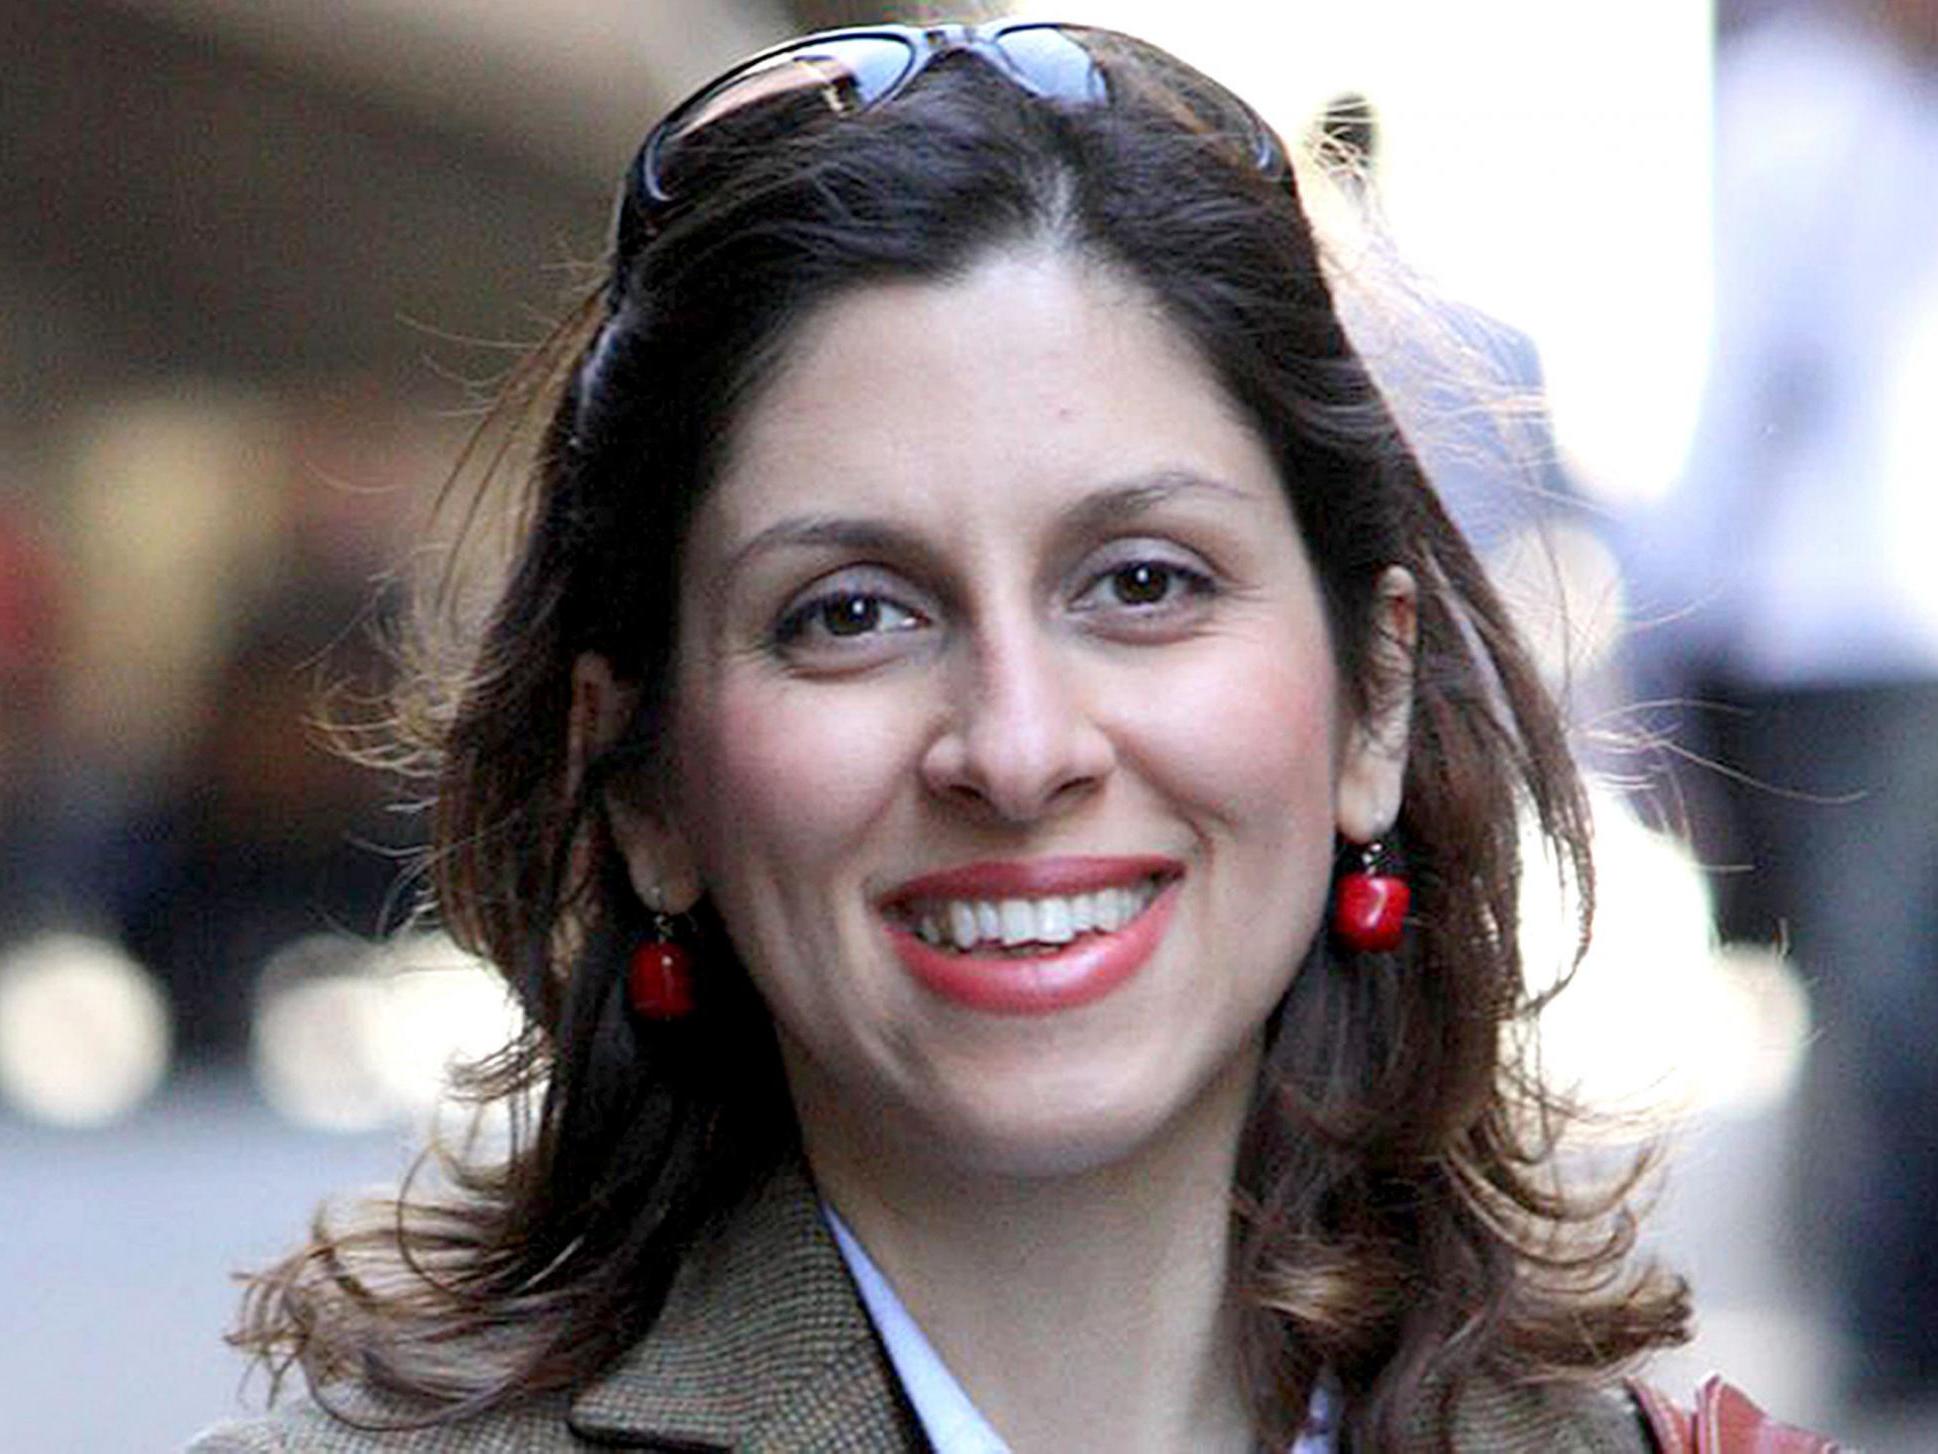 Nazanin Zaghari-Ratcliffe has concluded her hunger strike